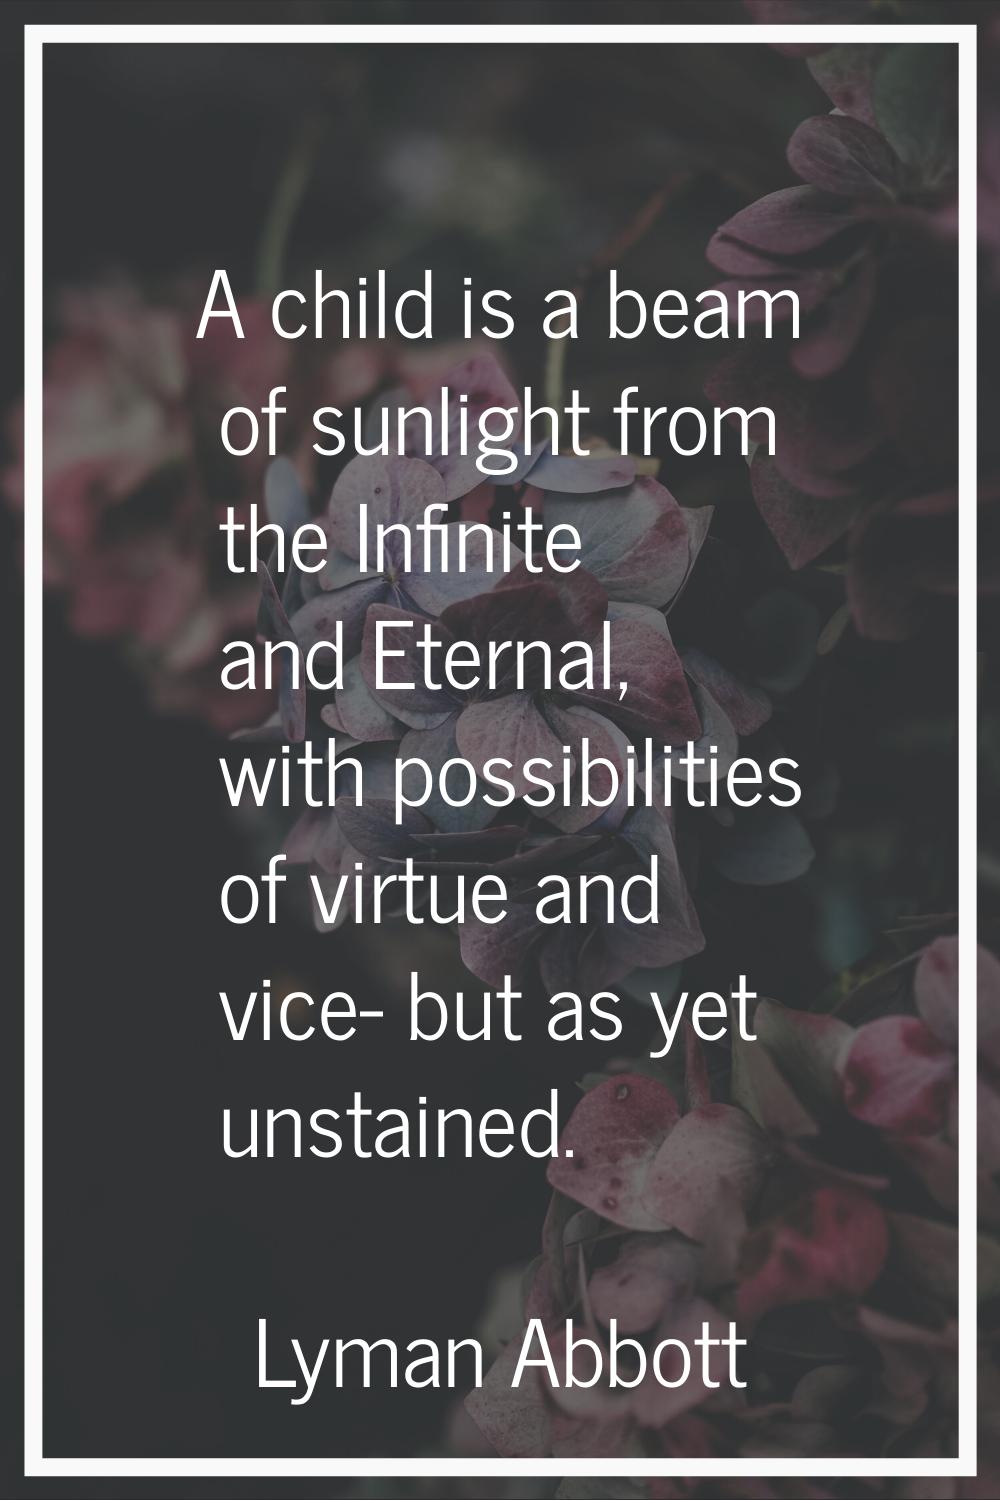 A child is a beam of sunlight from the Infinite and Eternal, with possibilities of virtue and vice-